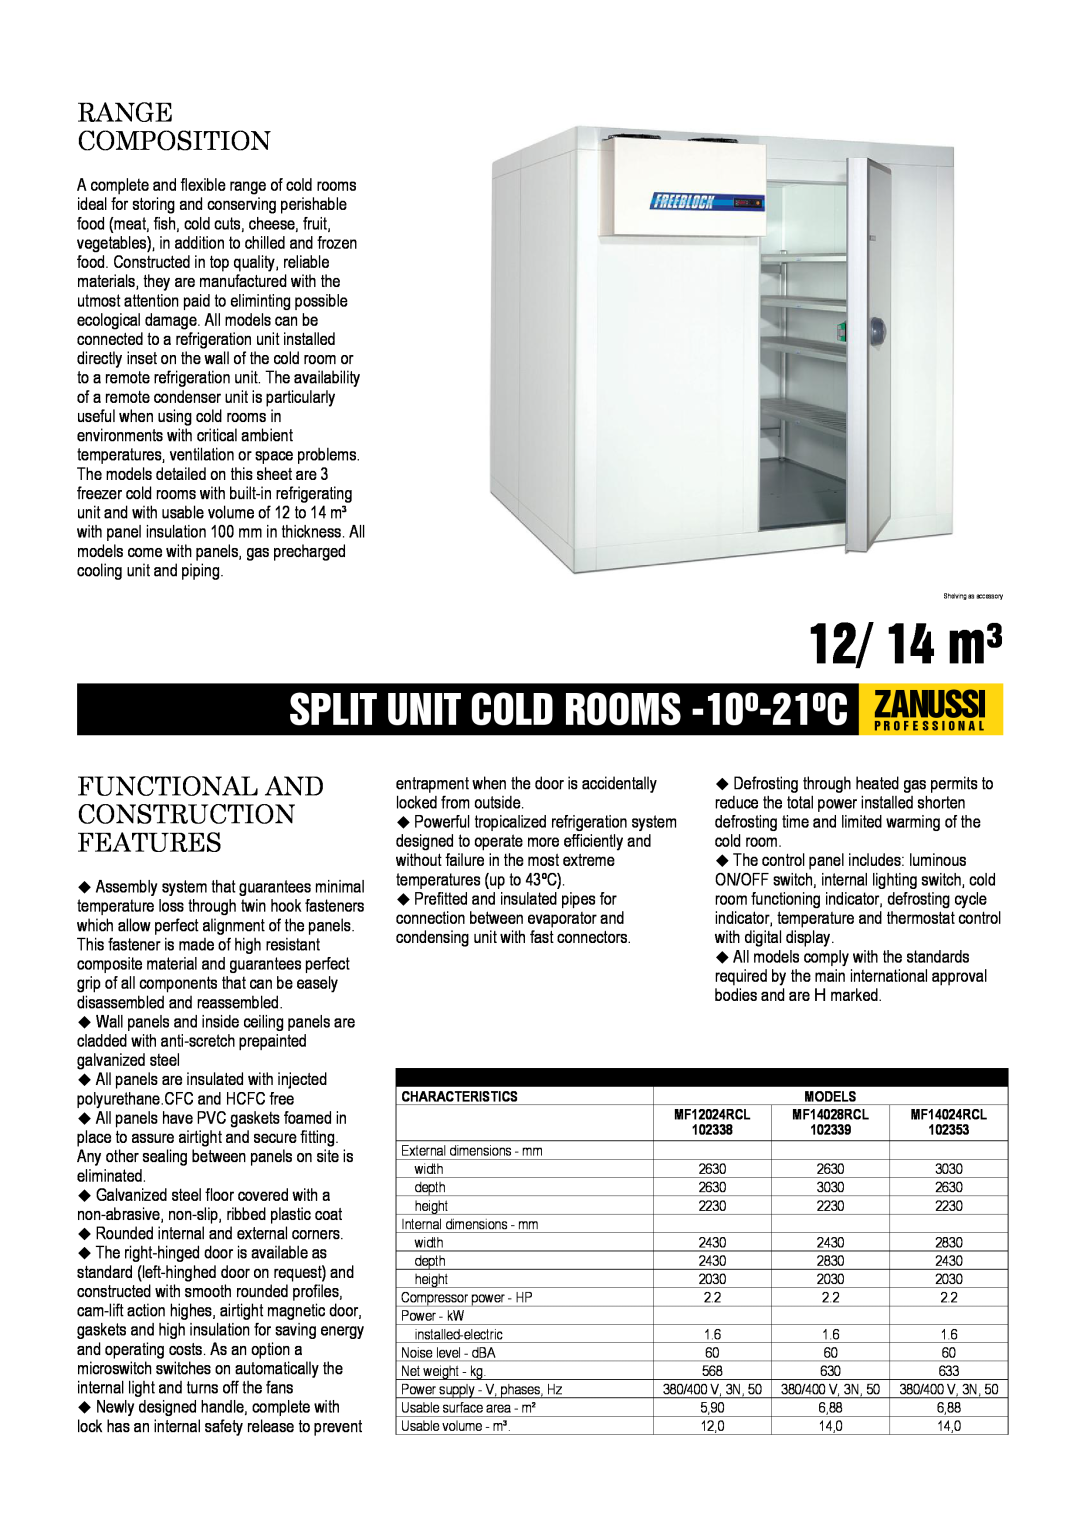 Zanussi MF14028RCL, MF14024RCL, MF12024RCL dimensions 12/ 14 m³, Range Composition, Functional And Construction Features 